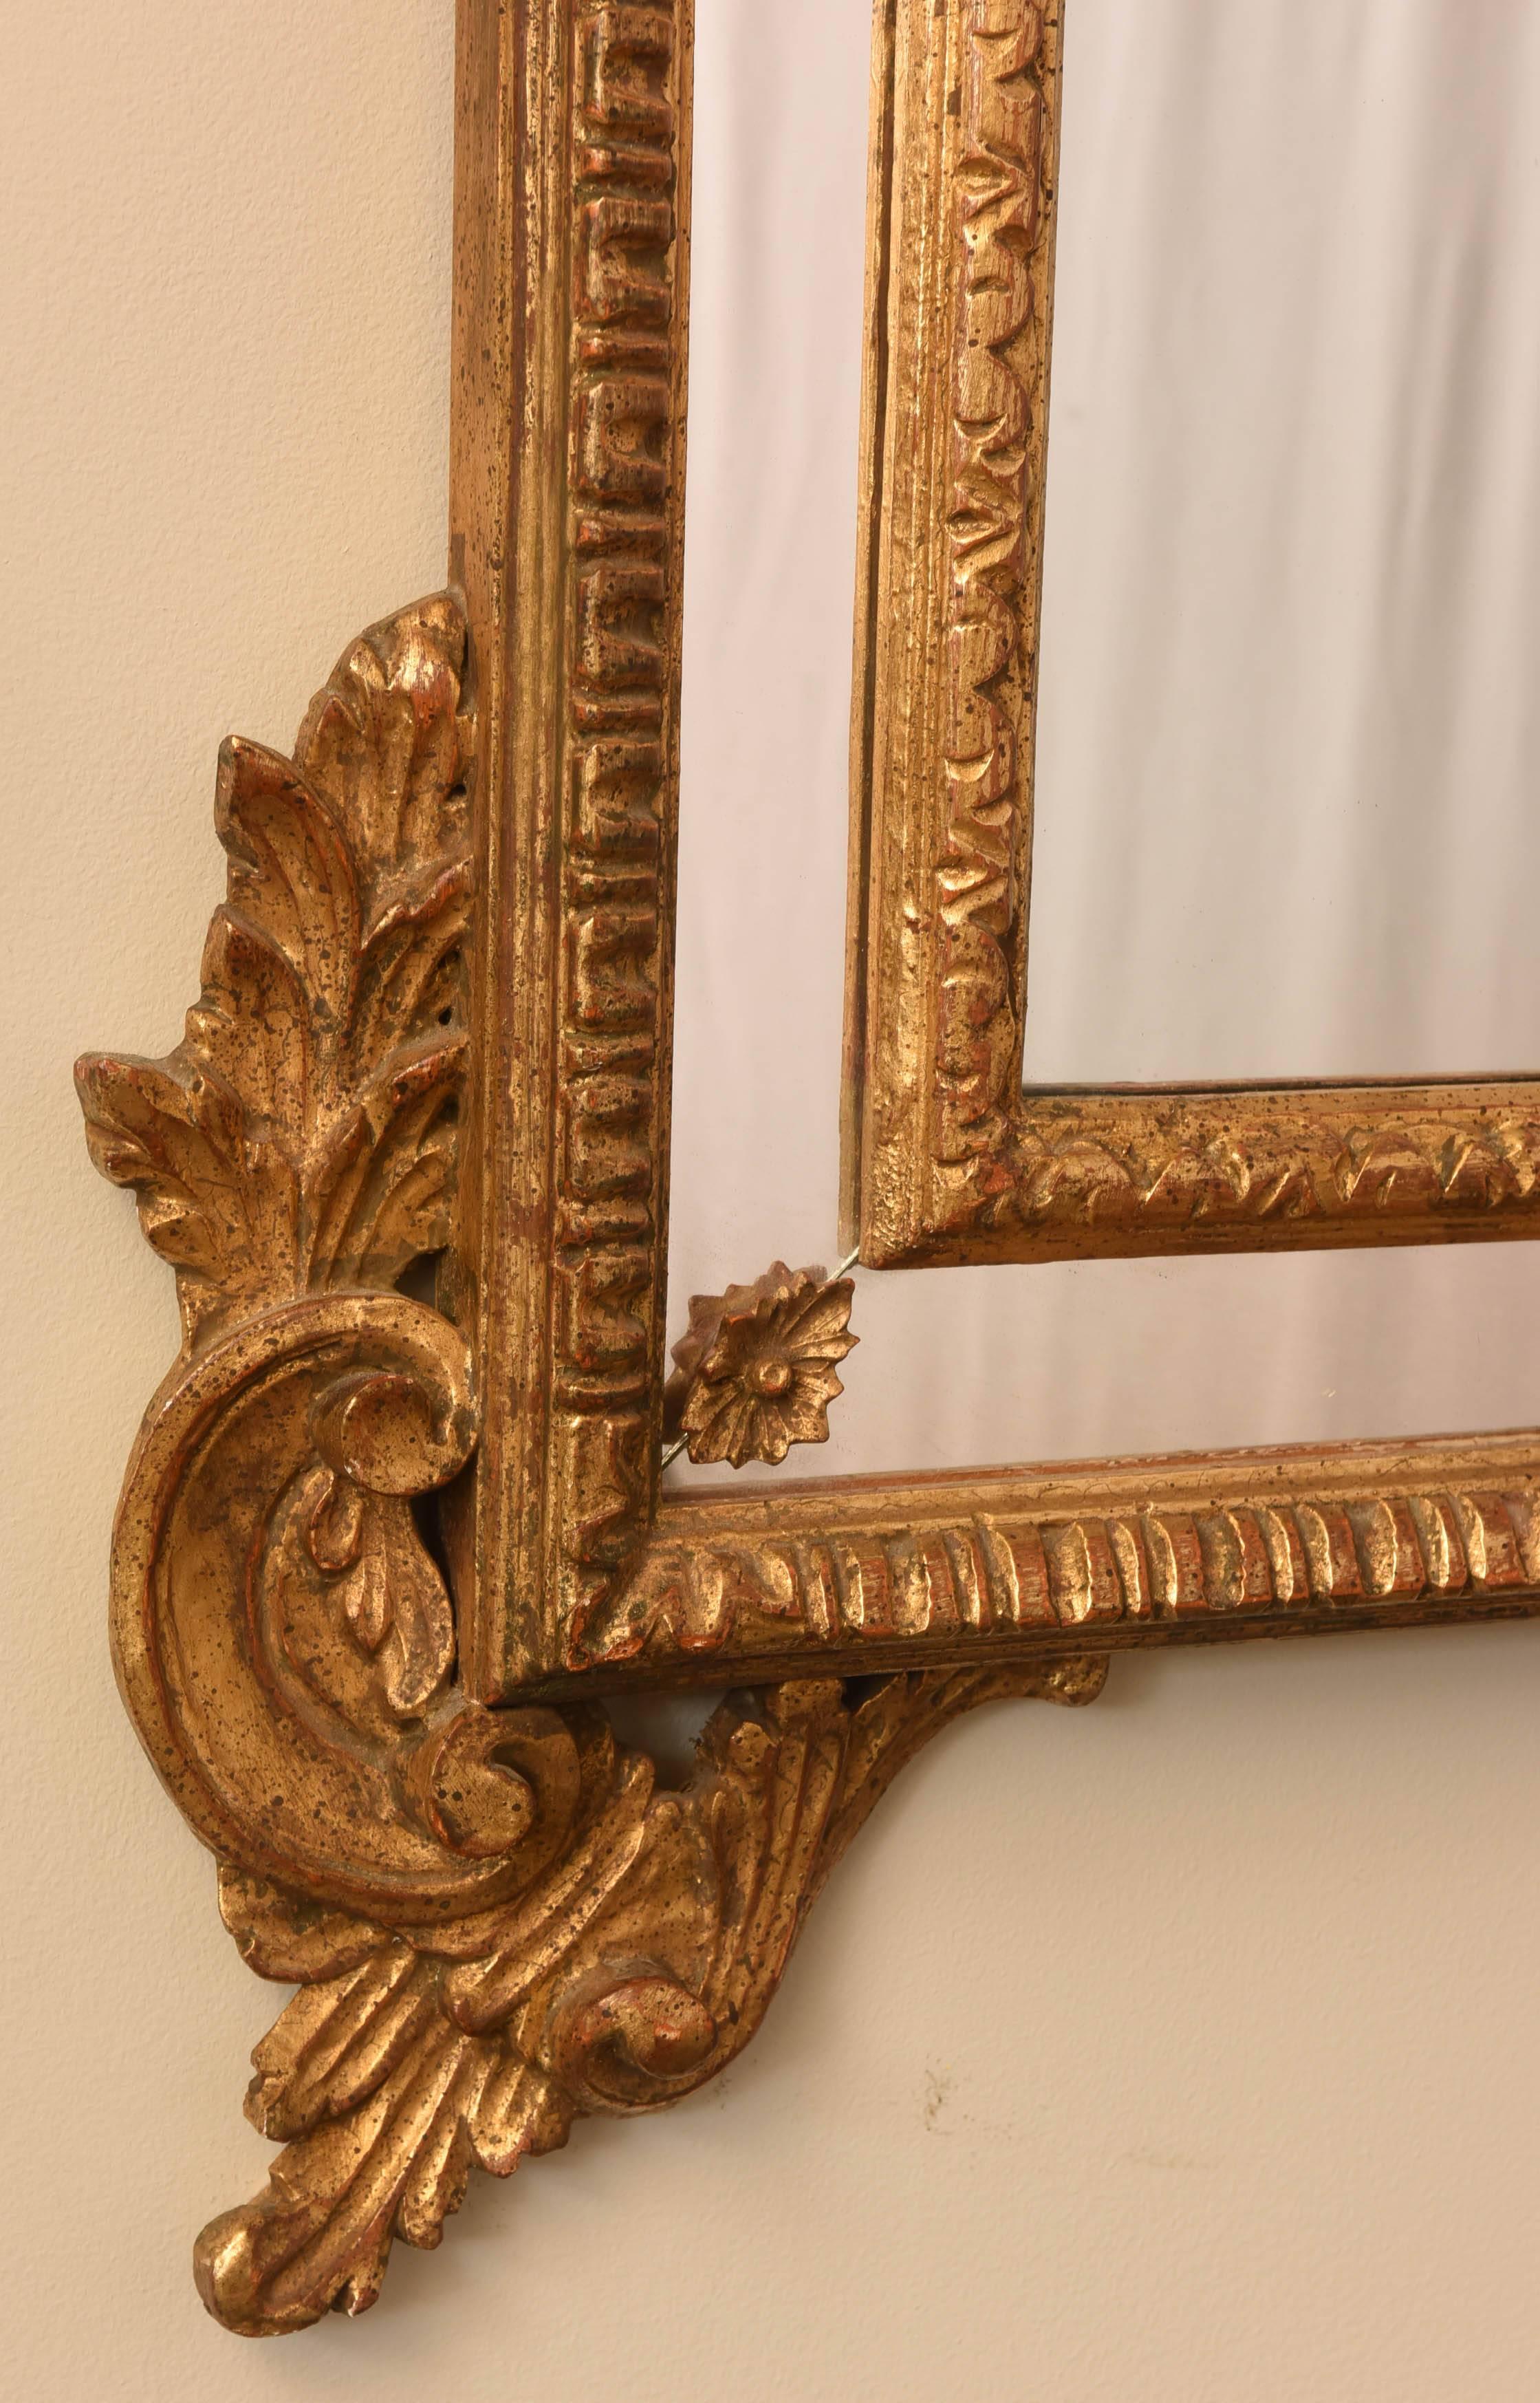 Fine mirror, having an arched form, with gadrooned edge, framed in mirrored relief, framed with elaborately carved, pierced border, scrolling floral sprays, surmounted by a pierced pediment of double C-scrolls centered by a rosette and foliate